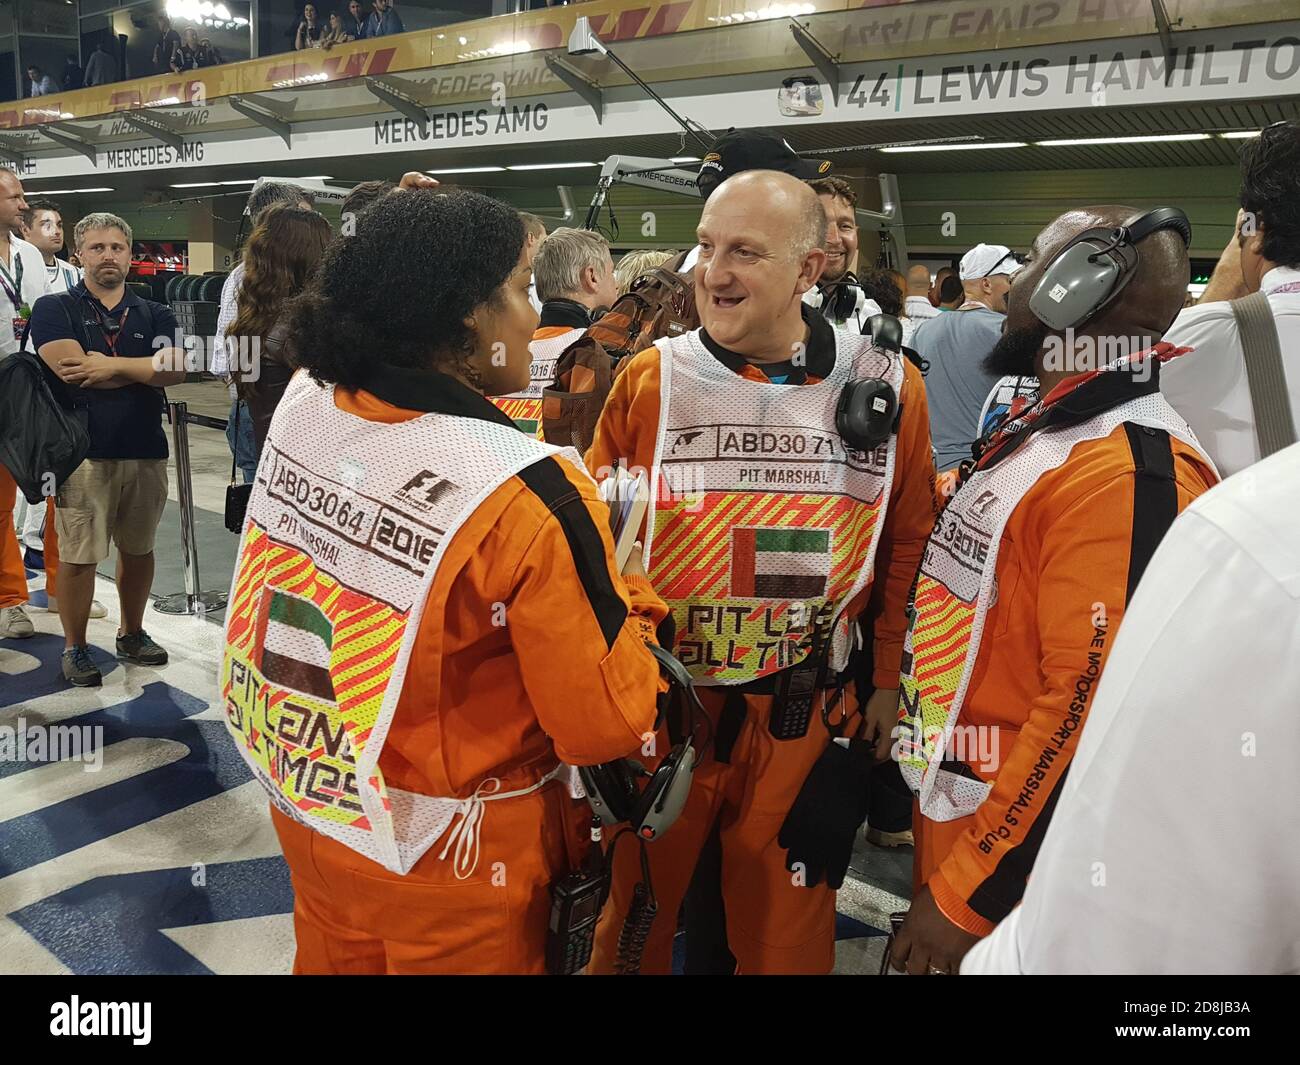 Pit Line Marshalls discuss the race in front of Lewis Hamilton's garage at Formula 1 Abu Dhabi Stock Photo